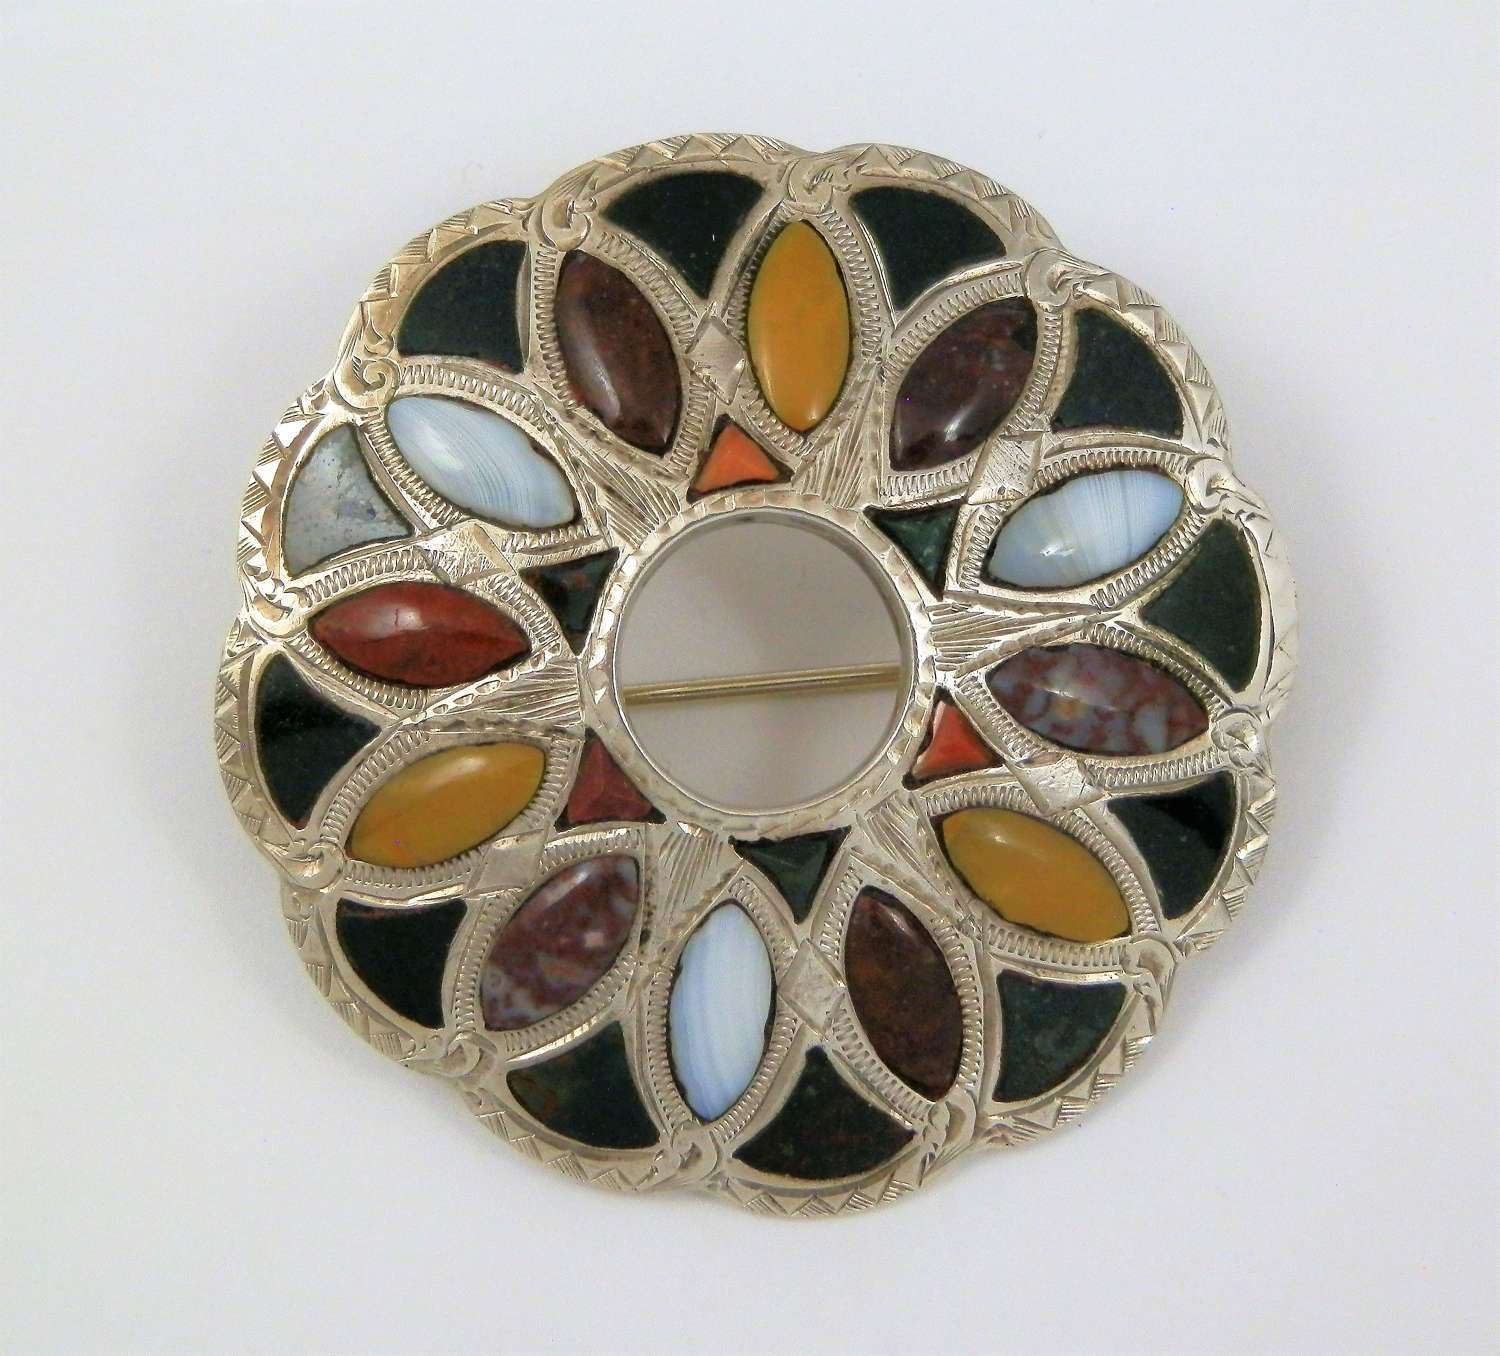 Victorian Scottish silver agate or pebble brooch. c.1880